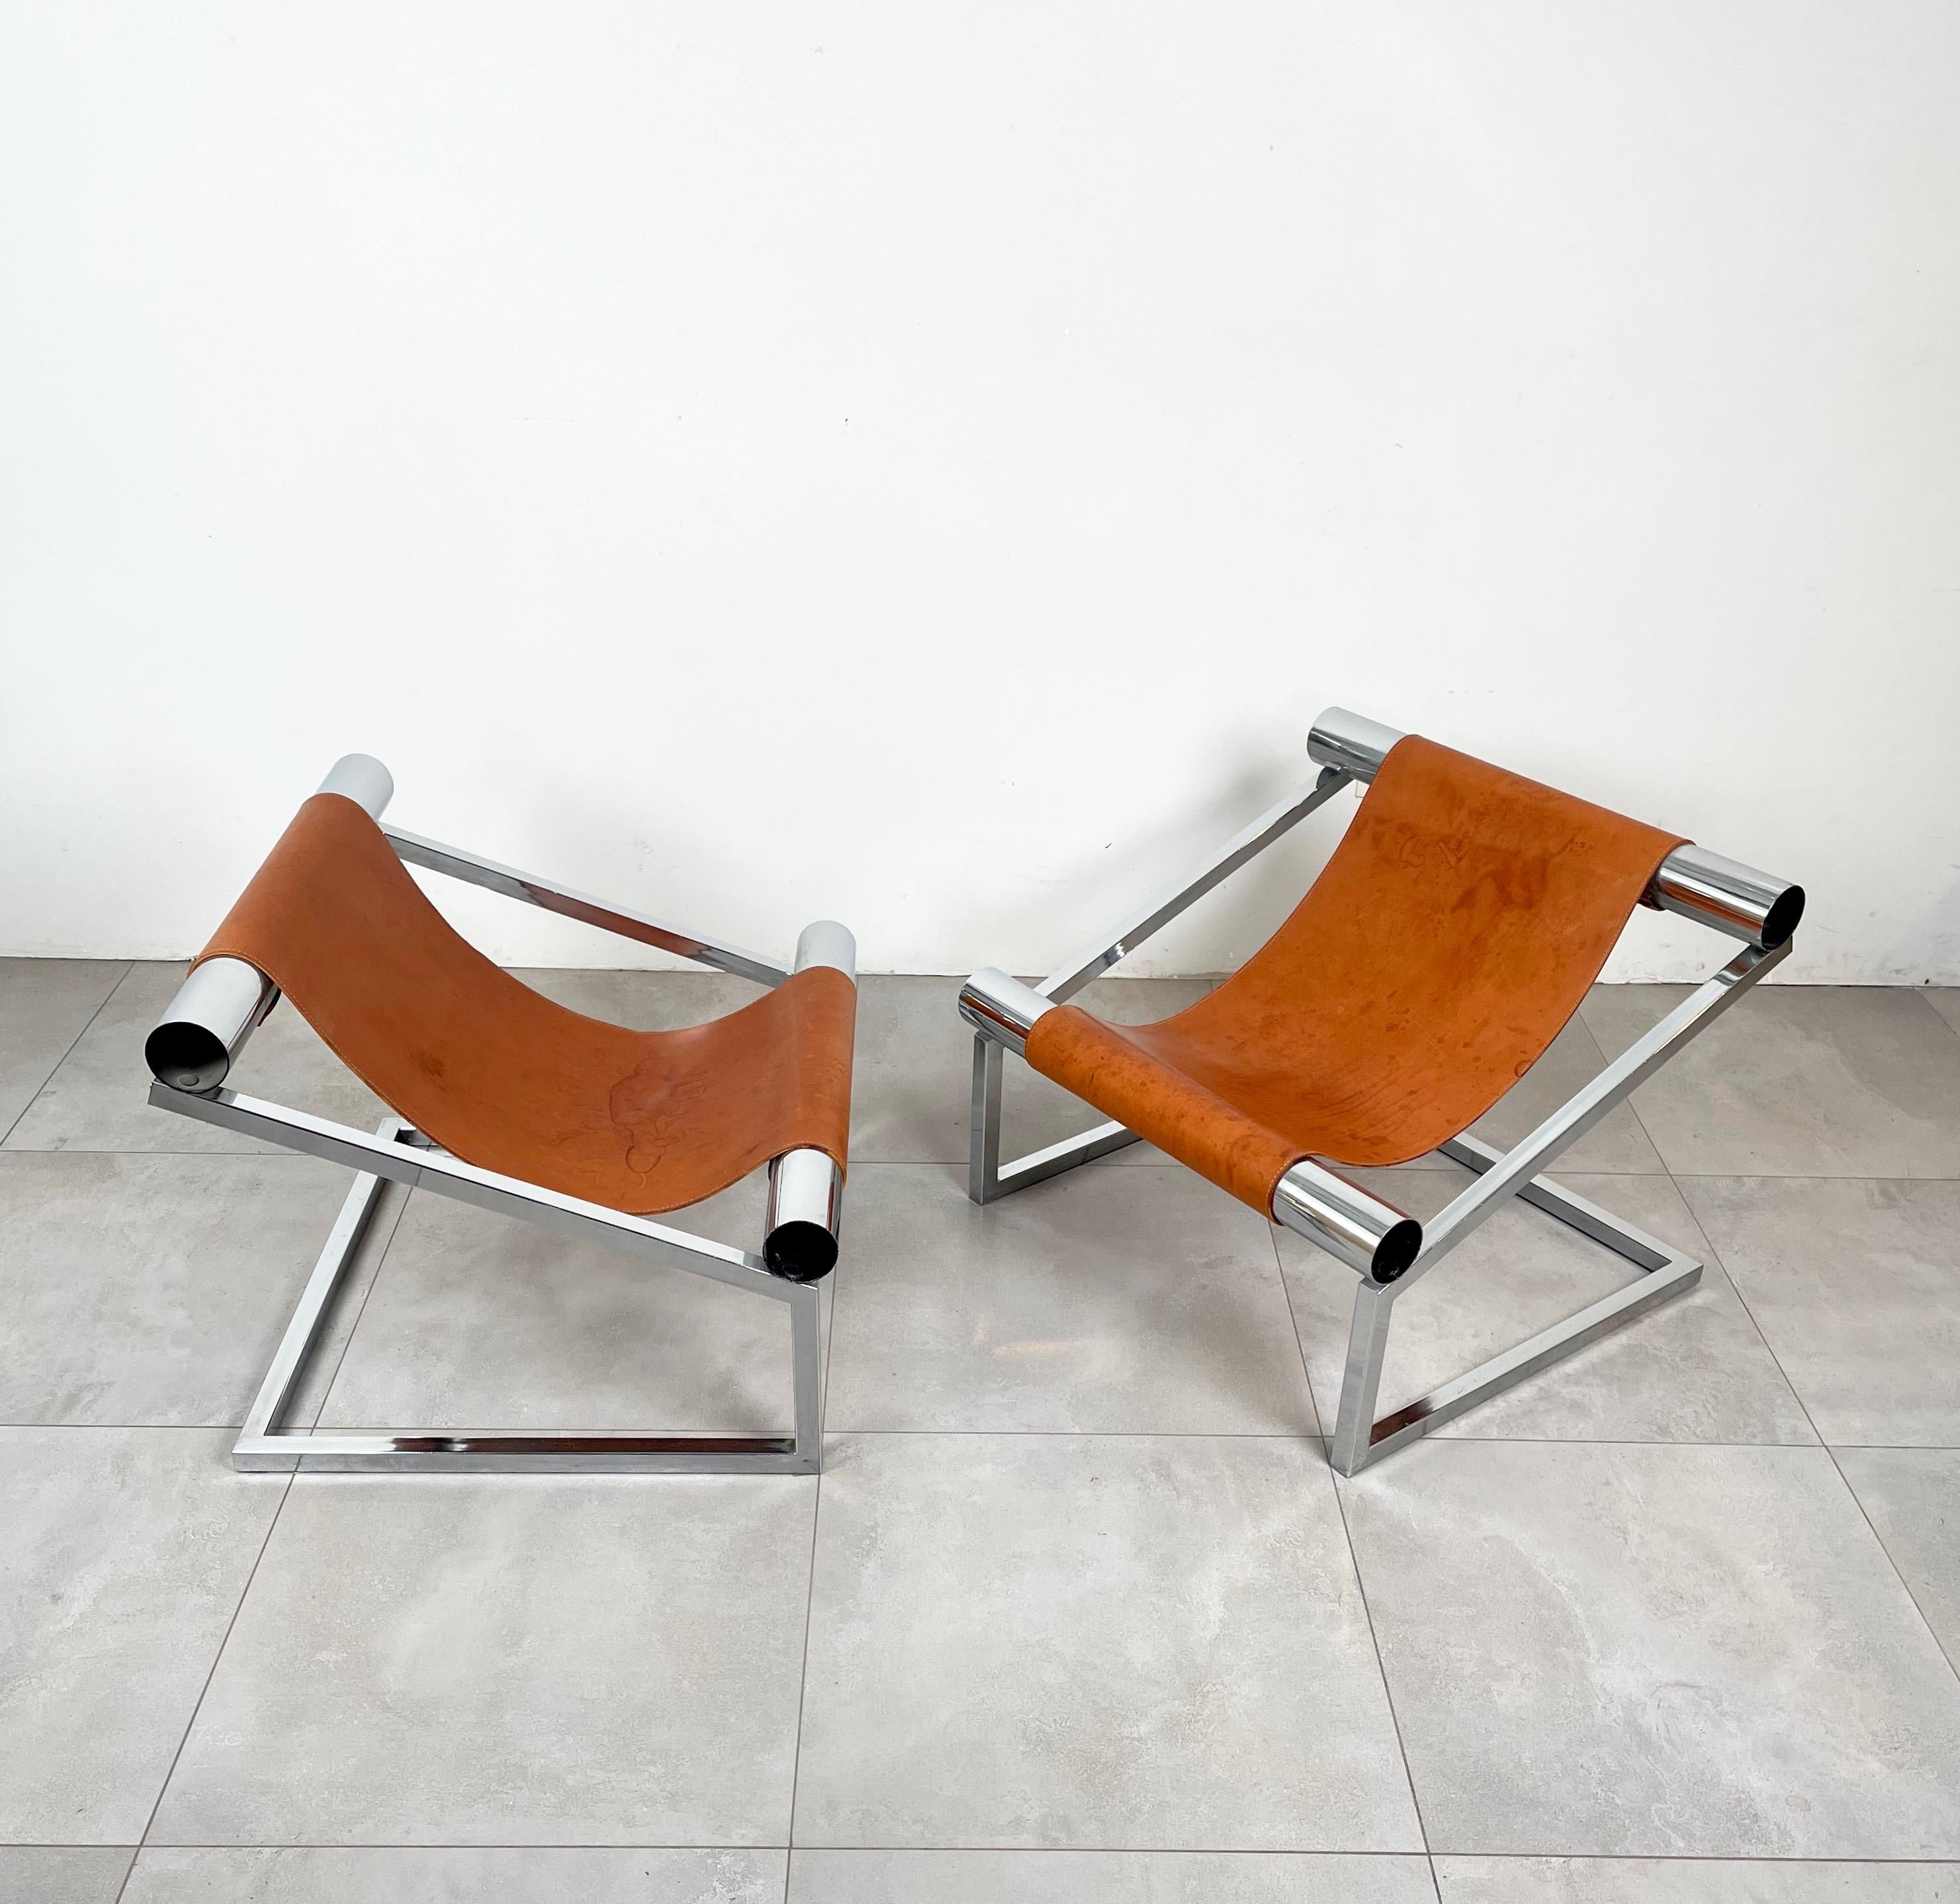 Late 20th Century Mid-Century Modern Pair of Armchairs in Chrome and Leather, Italy 1970s For Sale